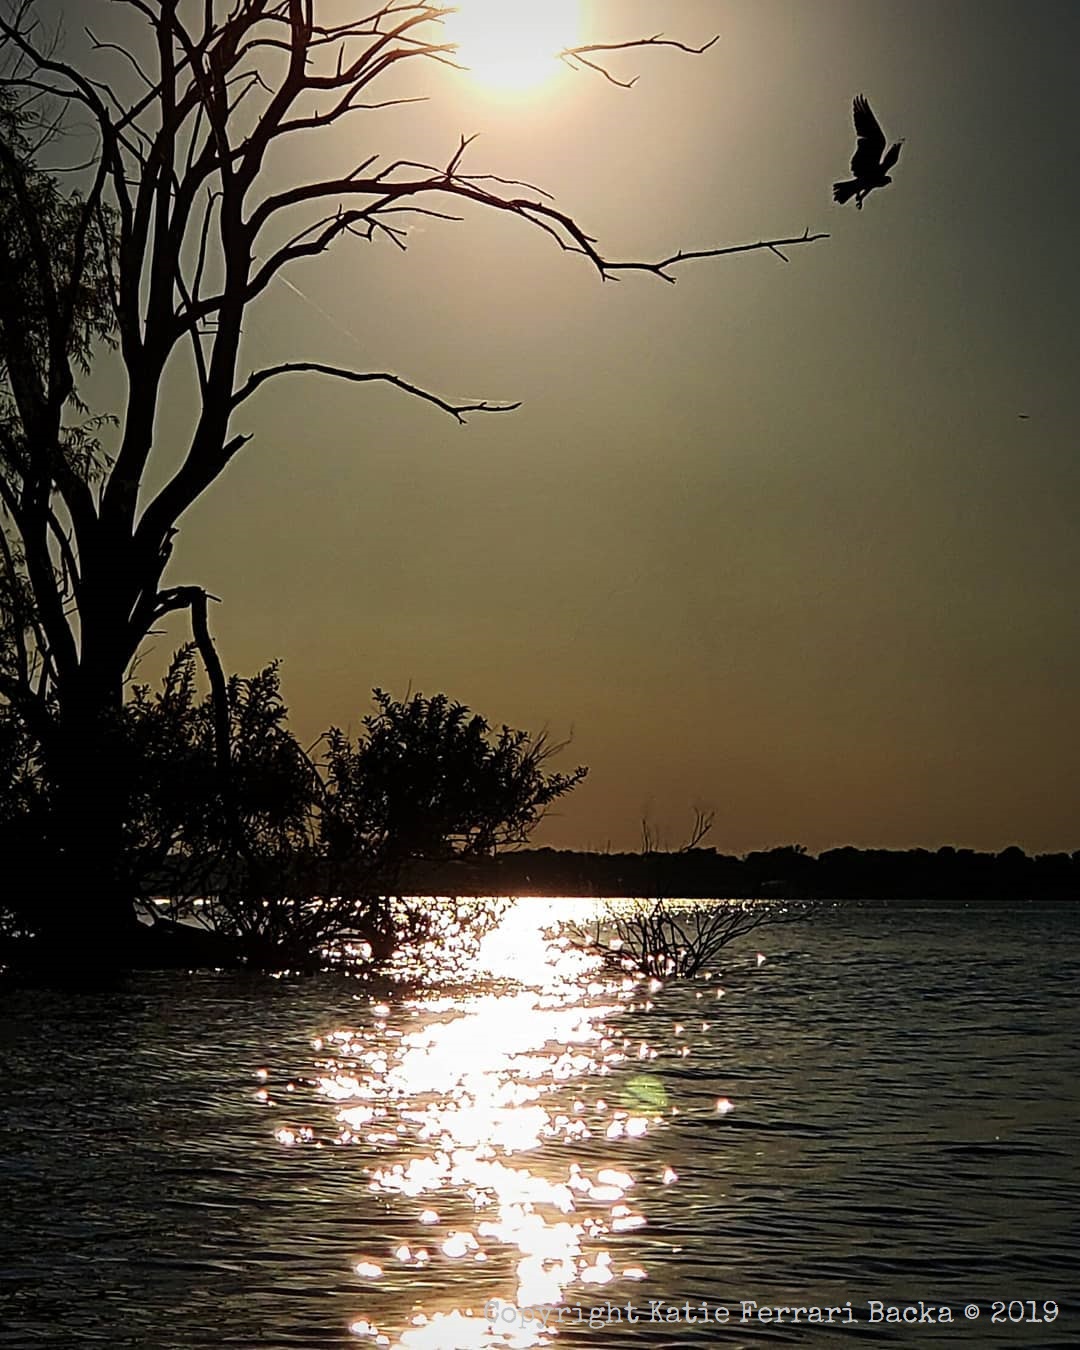 Silhouette shot of an Osprey taking flight from a branch at sunset